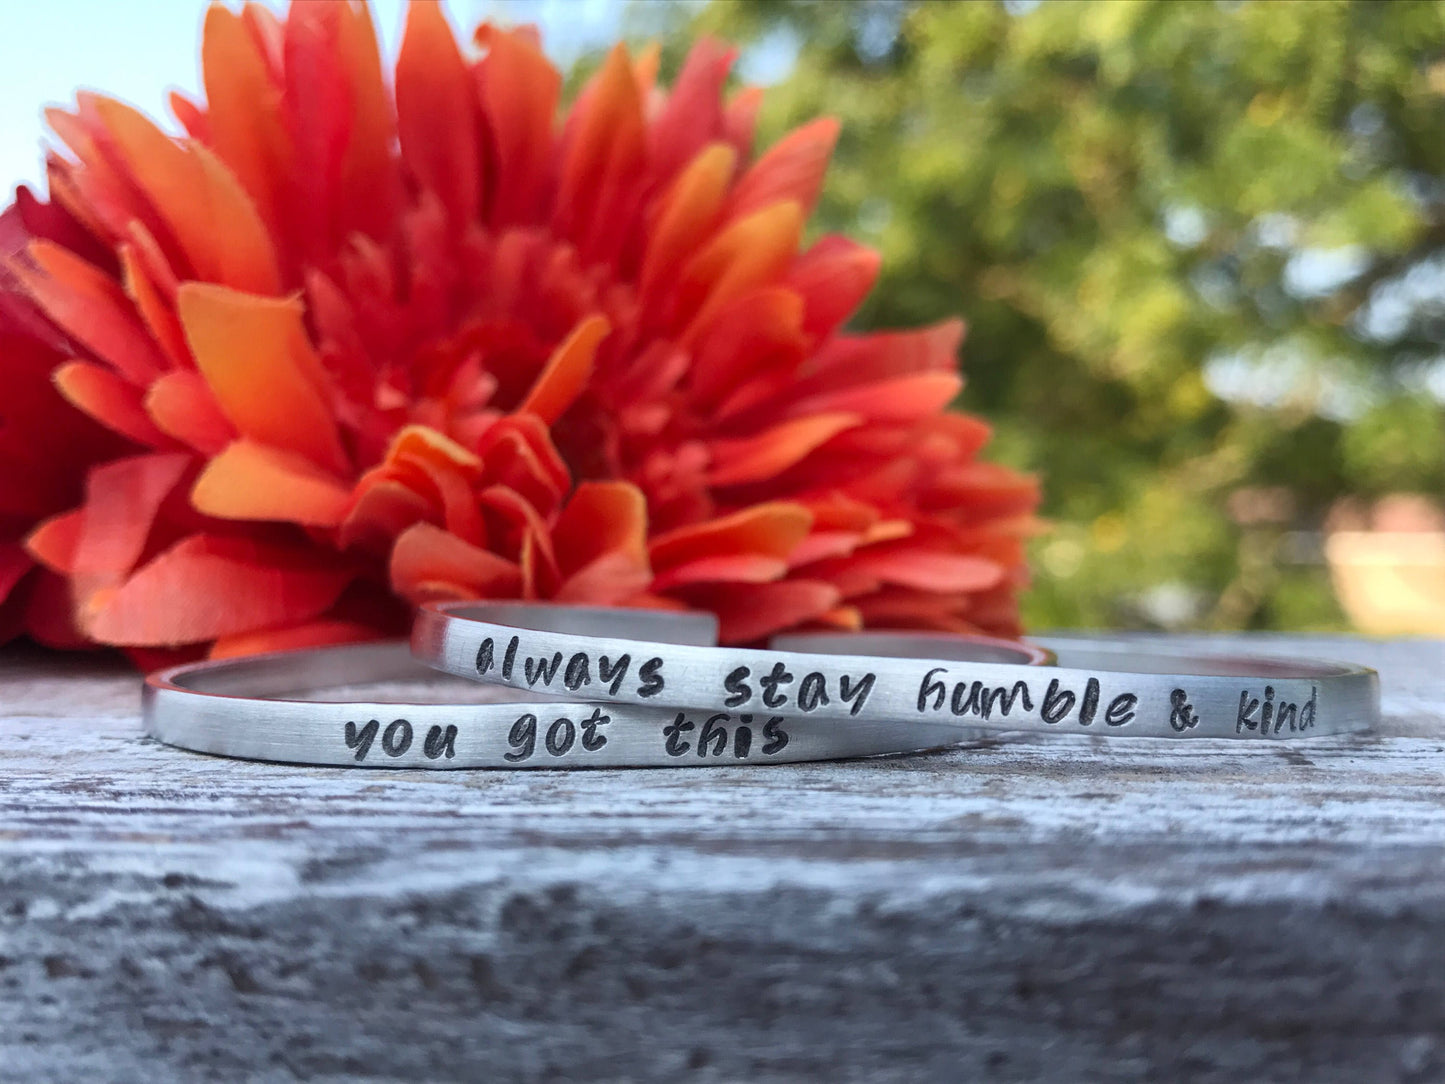 Be your own kind of beautiful--strong woman--inspirational jewelry--birthday gift--friend gift--religious--hand stamped--skinny silver